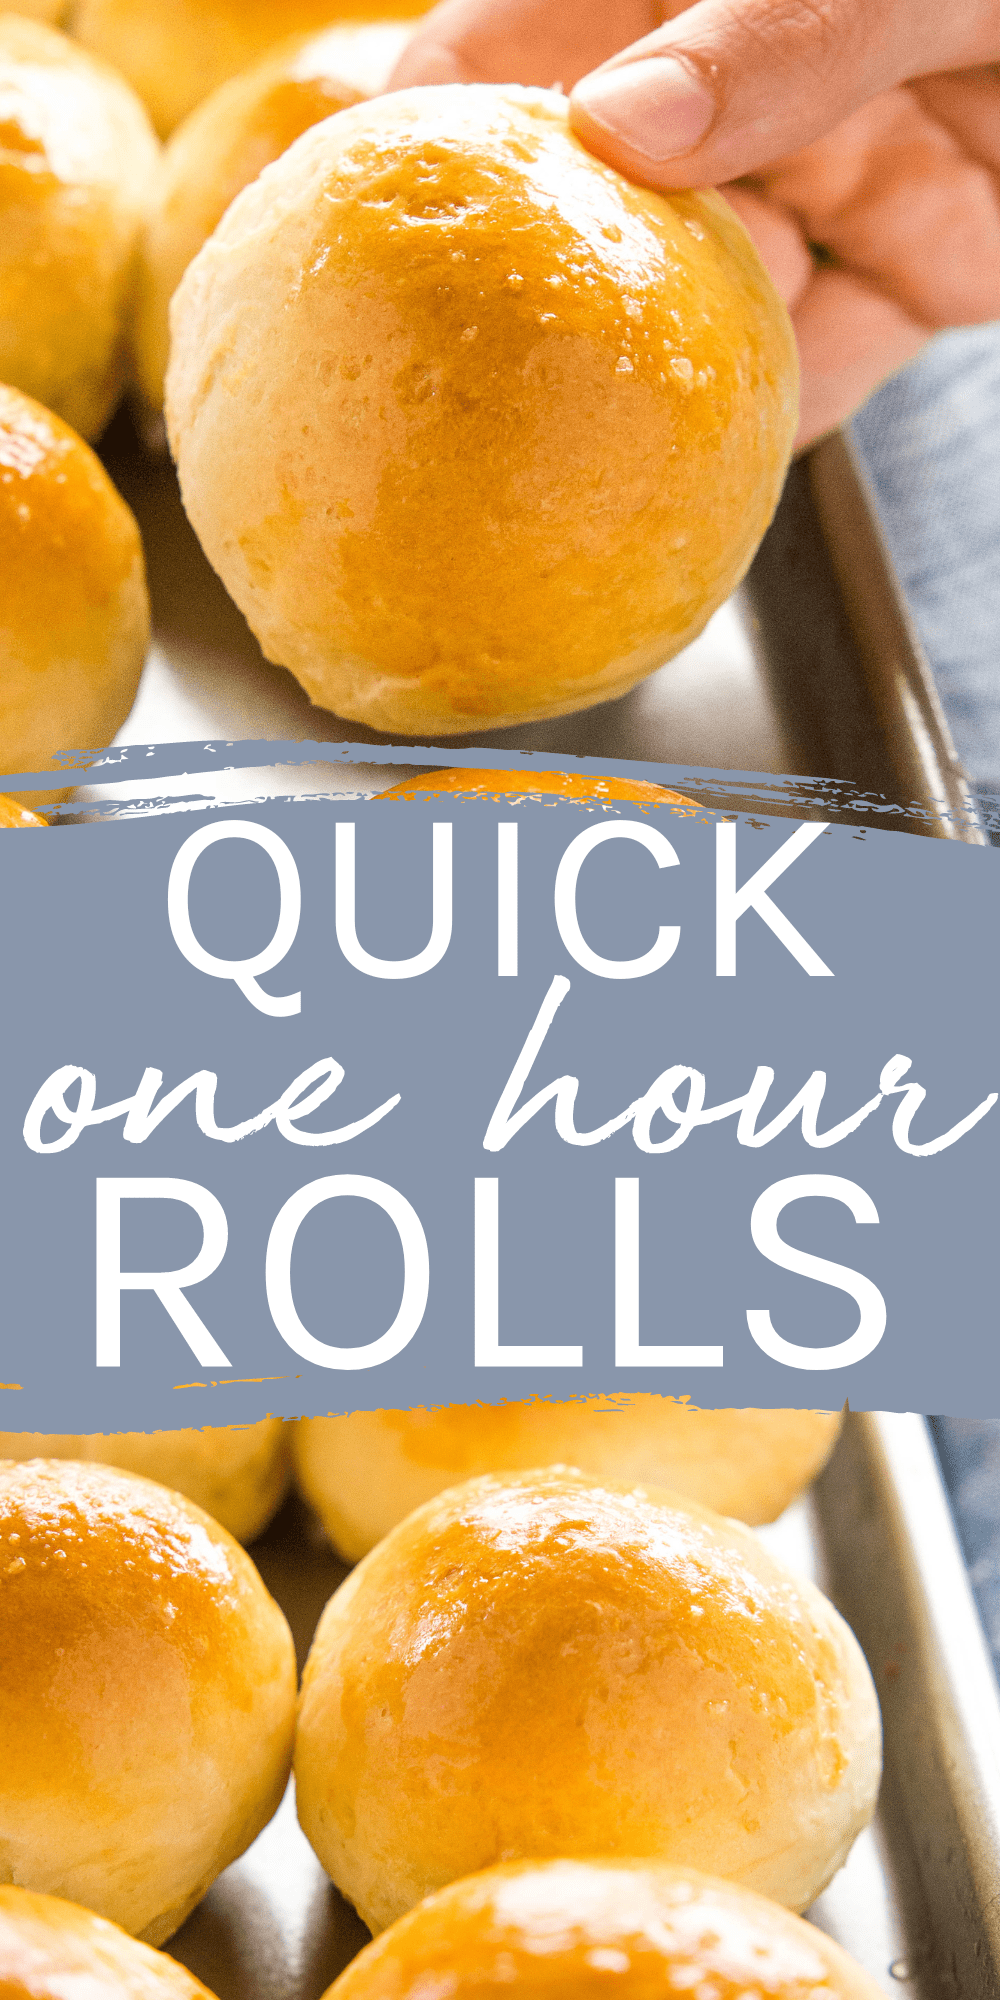 This Quick Dinner Rolls Recipe is the easiest dinner roll recipe that's ready in one hour or less. Easy pro tips and tricks for fluffy and delicious dinner rolls every single time. Recipe from thebusybaker.ca! #dinnerrolls #quickdinnerrolls #buns #holidaydinnerrolls #easybunrecipe #easyrollsrecipe #dinnerrollrecipe via @busybakerblog